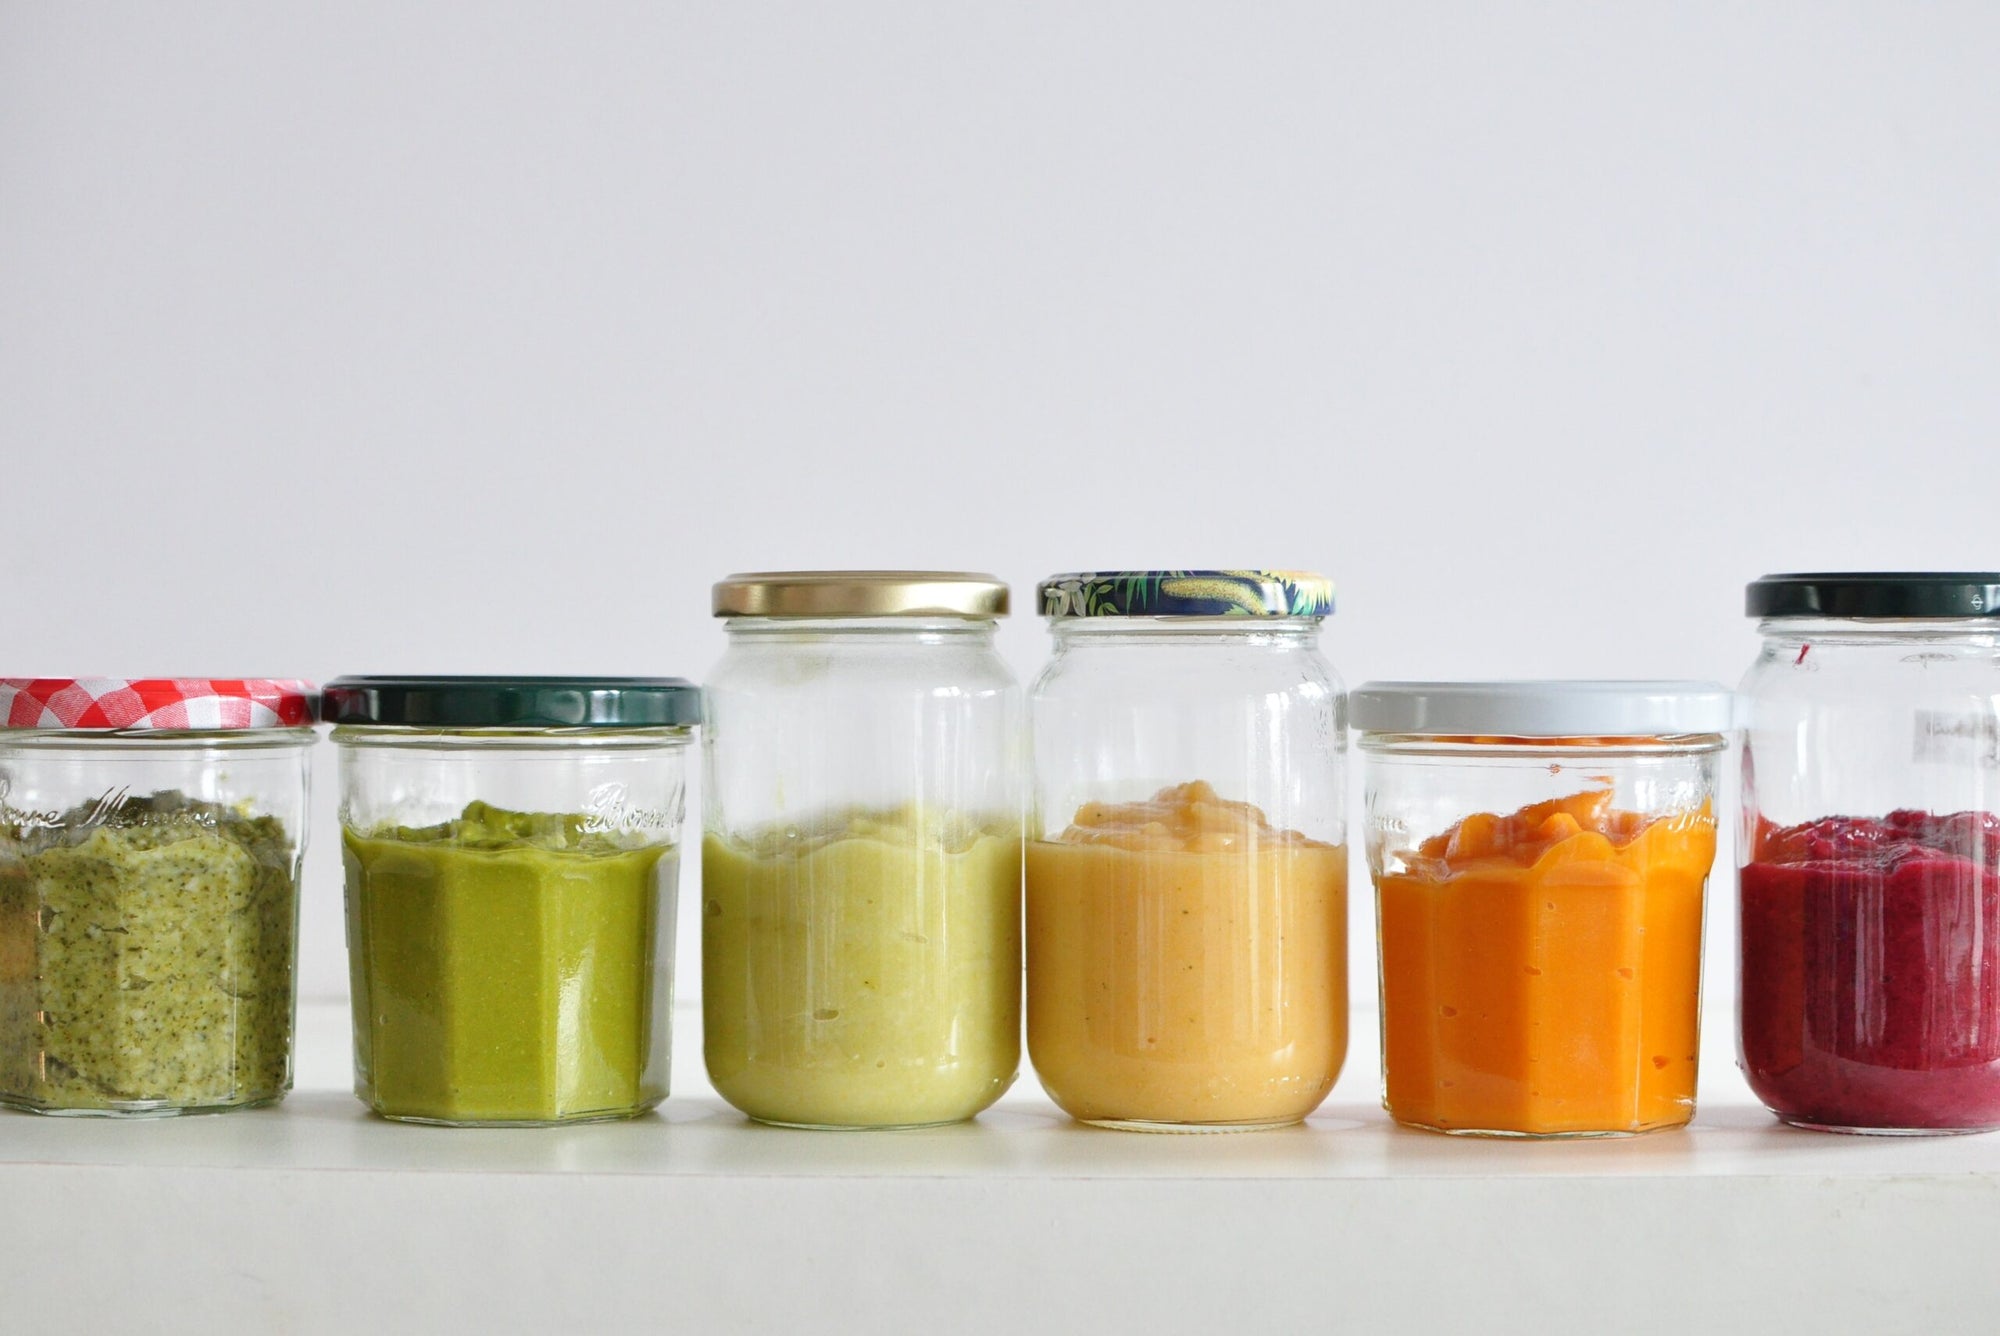 HOW TO MAKE YOUR OWN BABY FOOD